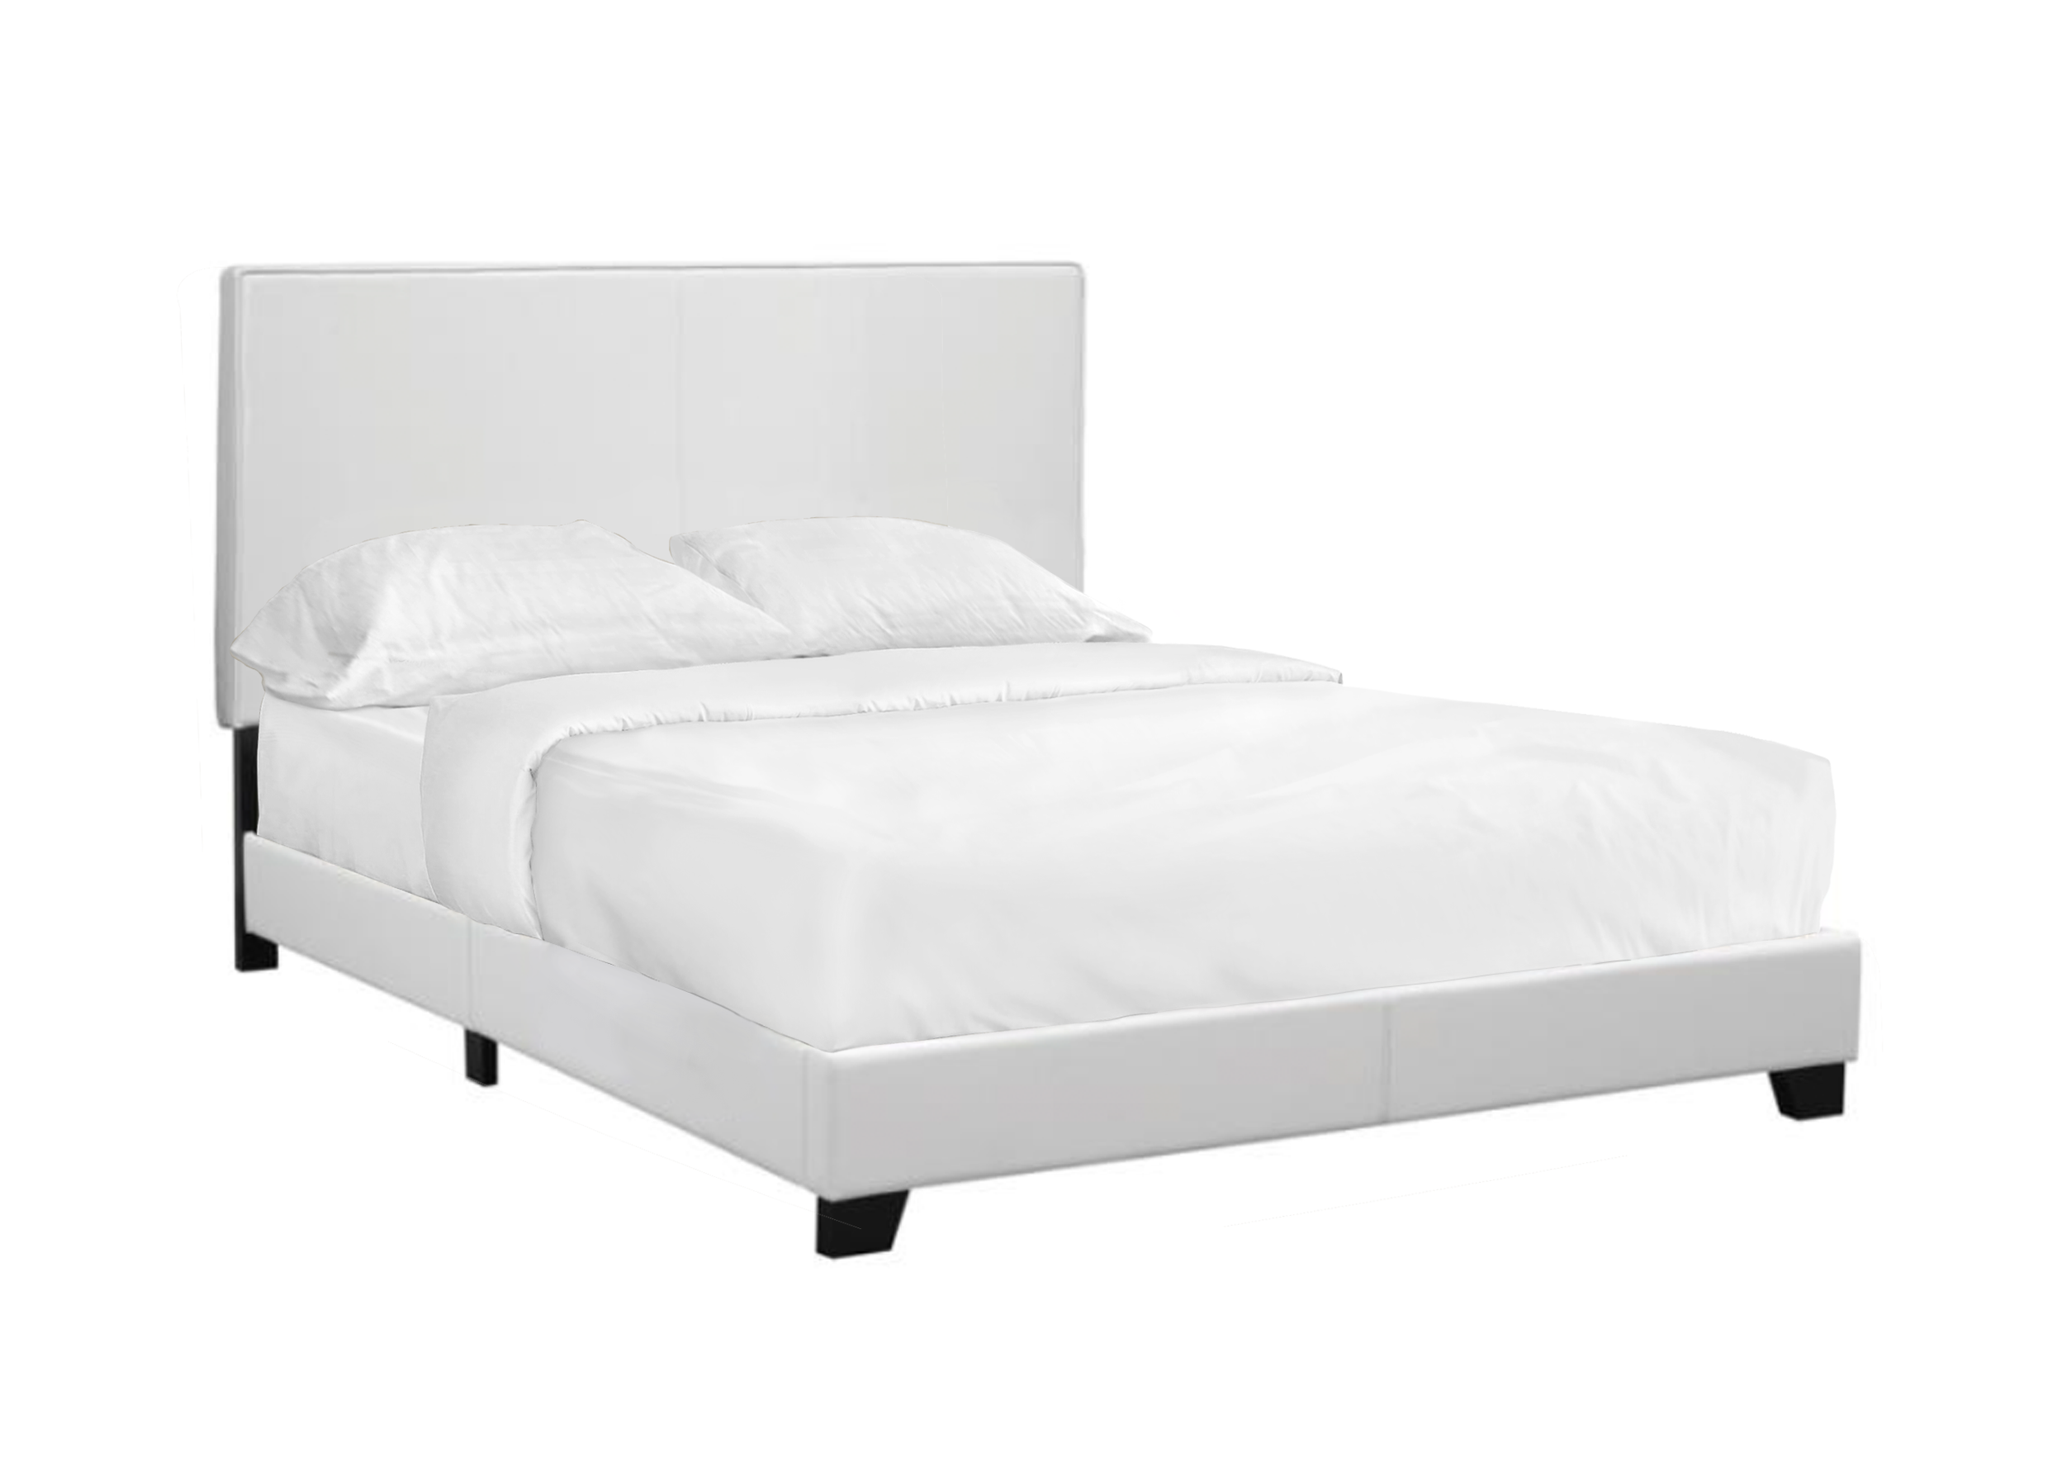 12 Month Rental Plan| White Leatherette Bed | From $40/mo